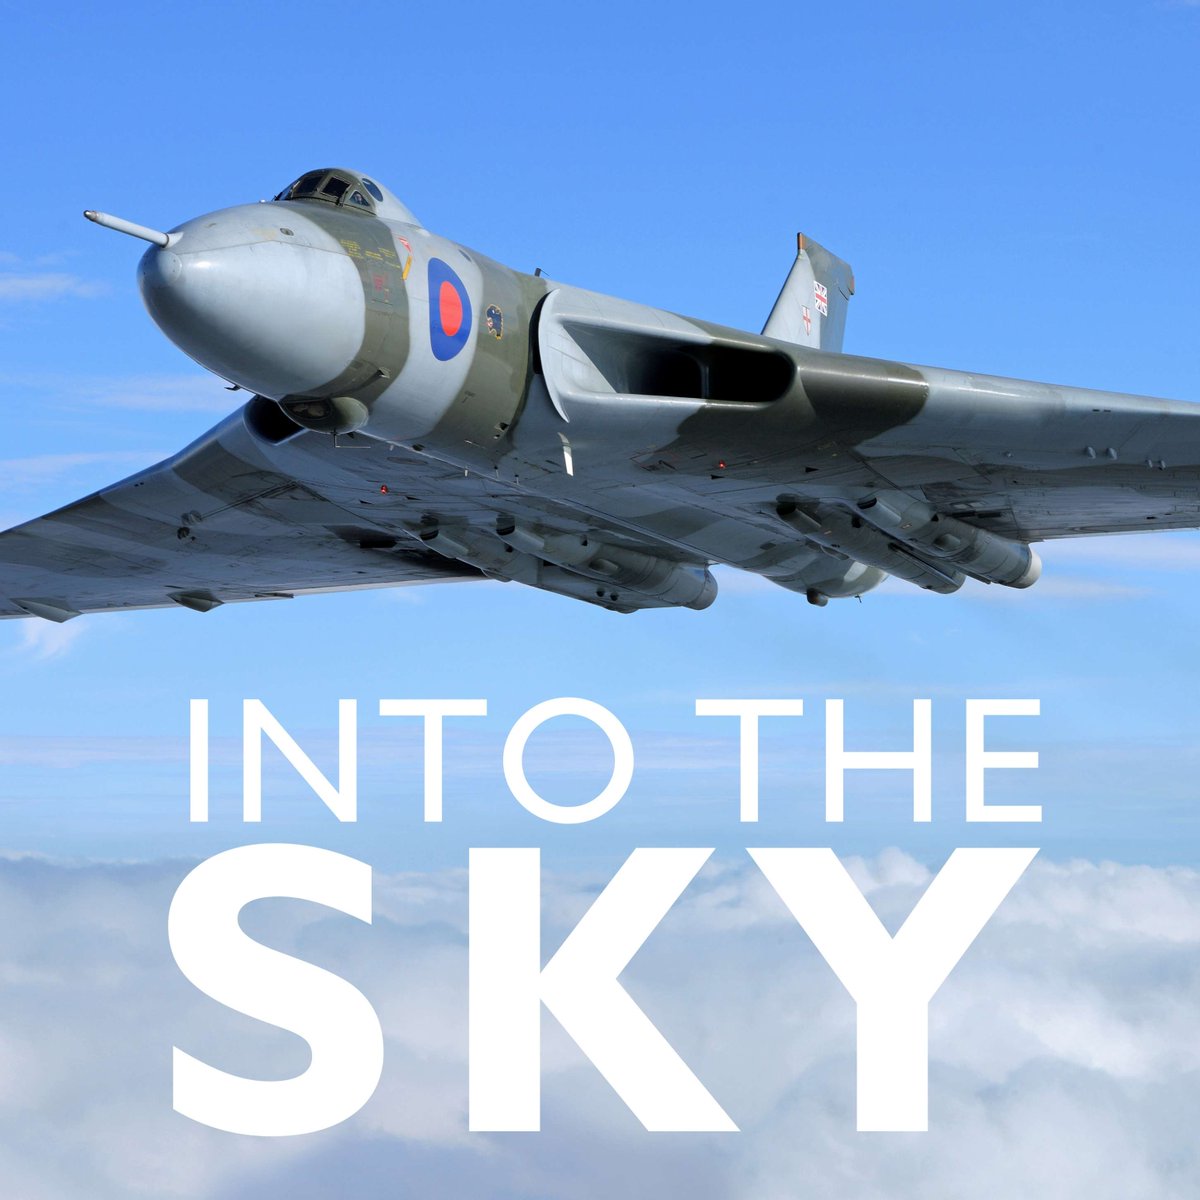 Take some time out this weekend and listen to our 'Into the Sky' podcasts. Season one episodes: Vulcan Memories, Robert's Vision, Flying High, In the sky, and Take Off. Listen now: feeds.captivate.fm/into-the-sky/ Season two coming soon!